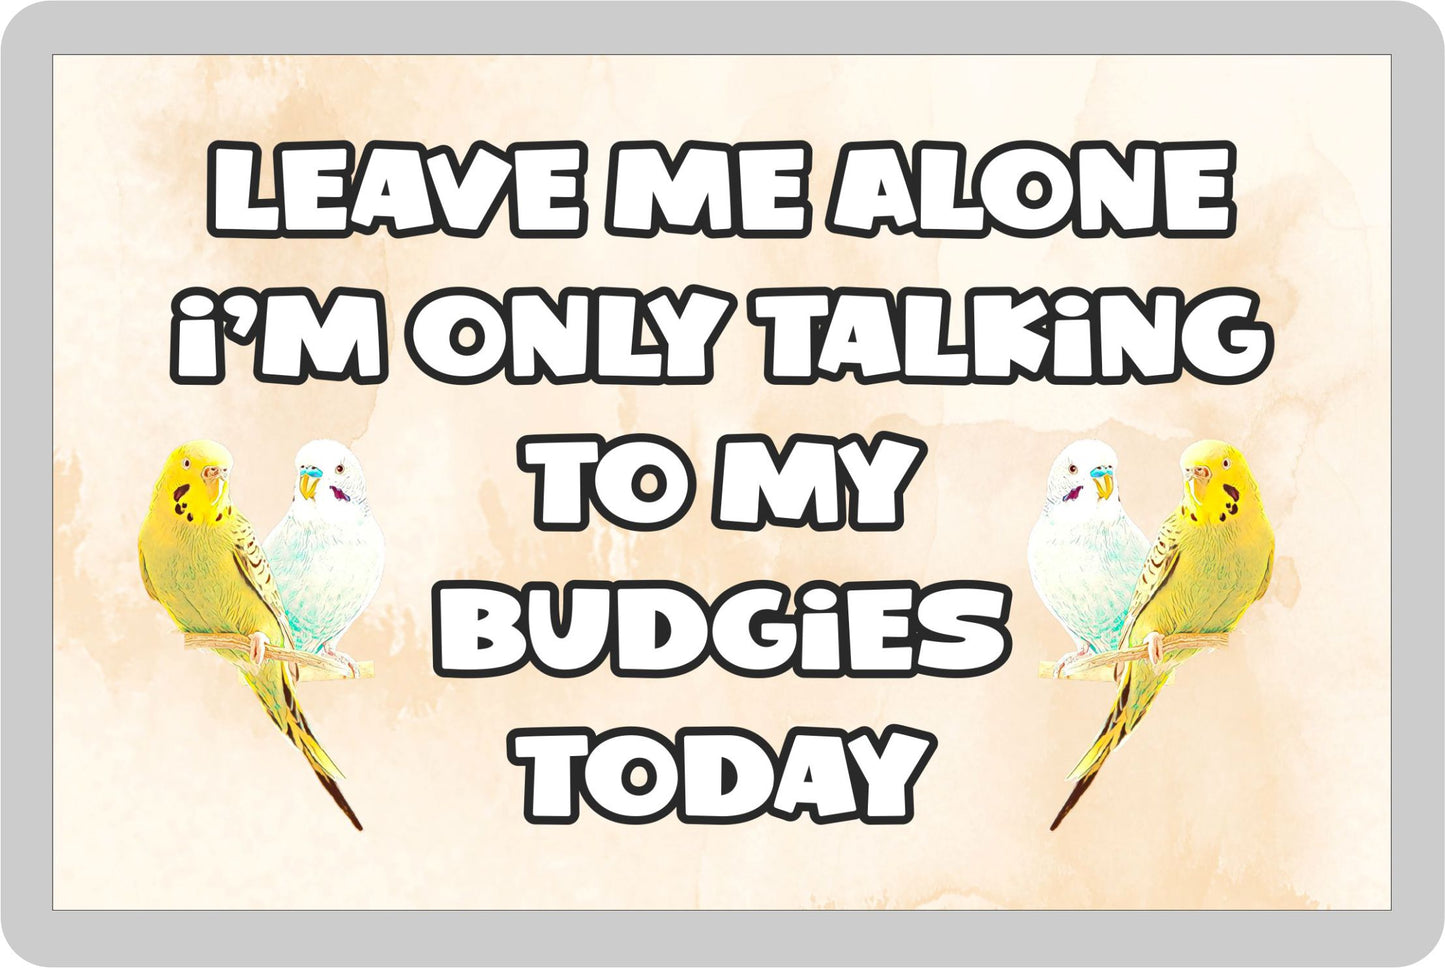 Budgie Fridge Magnet Gift - Leave Me Alone I'm Only Talking To My * Today - Novelty Cute Bird Animal Present